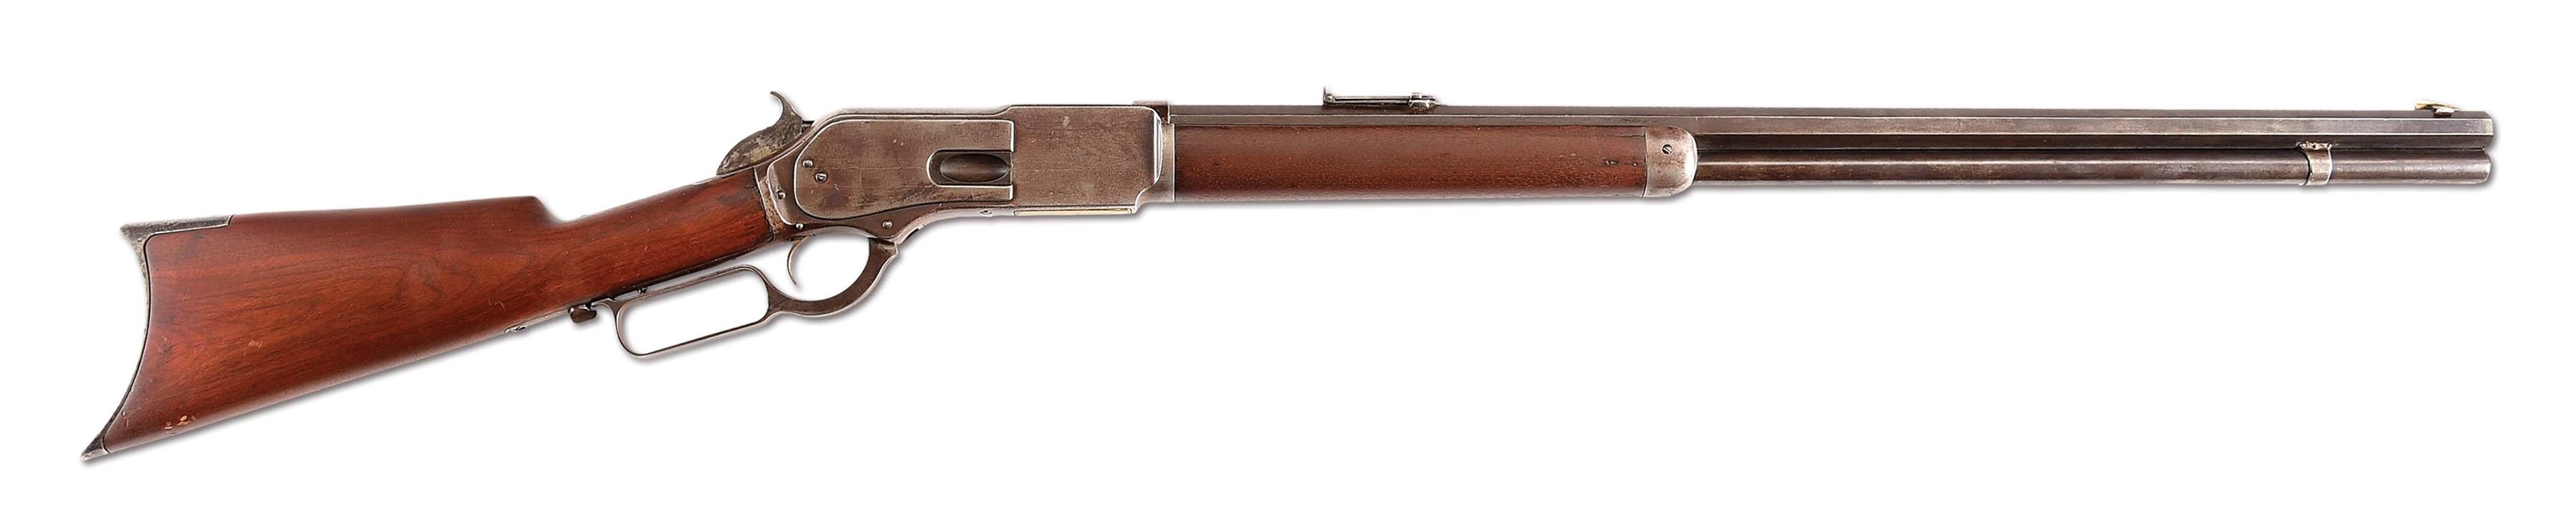 (A) EARLY WINCHESTER MODEL 1876 "CENTENNIAL RIFLE" WITH "OPEN TOP" FRAME SERIAL NUMBER 79.